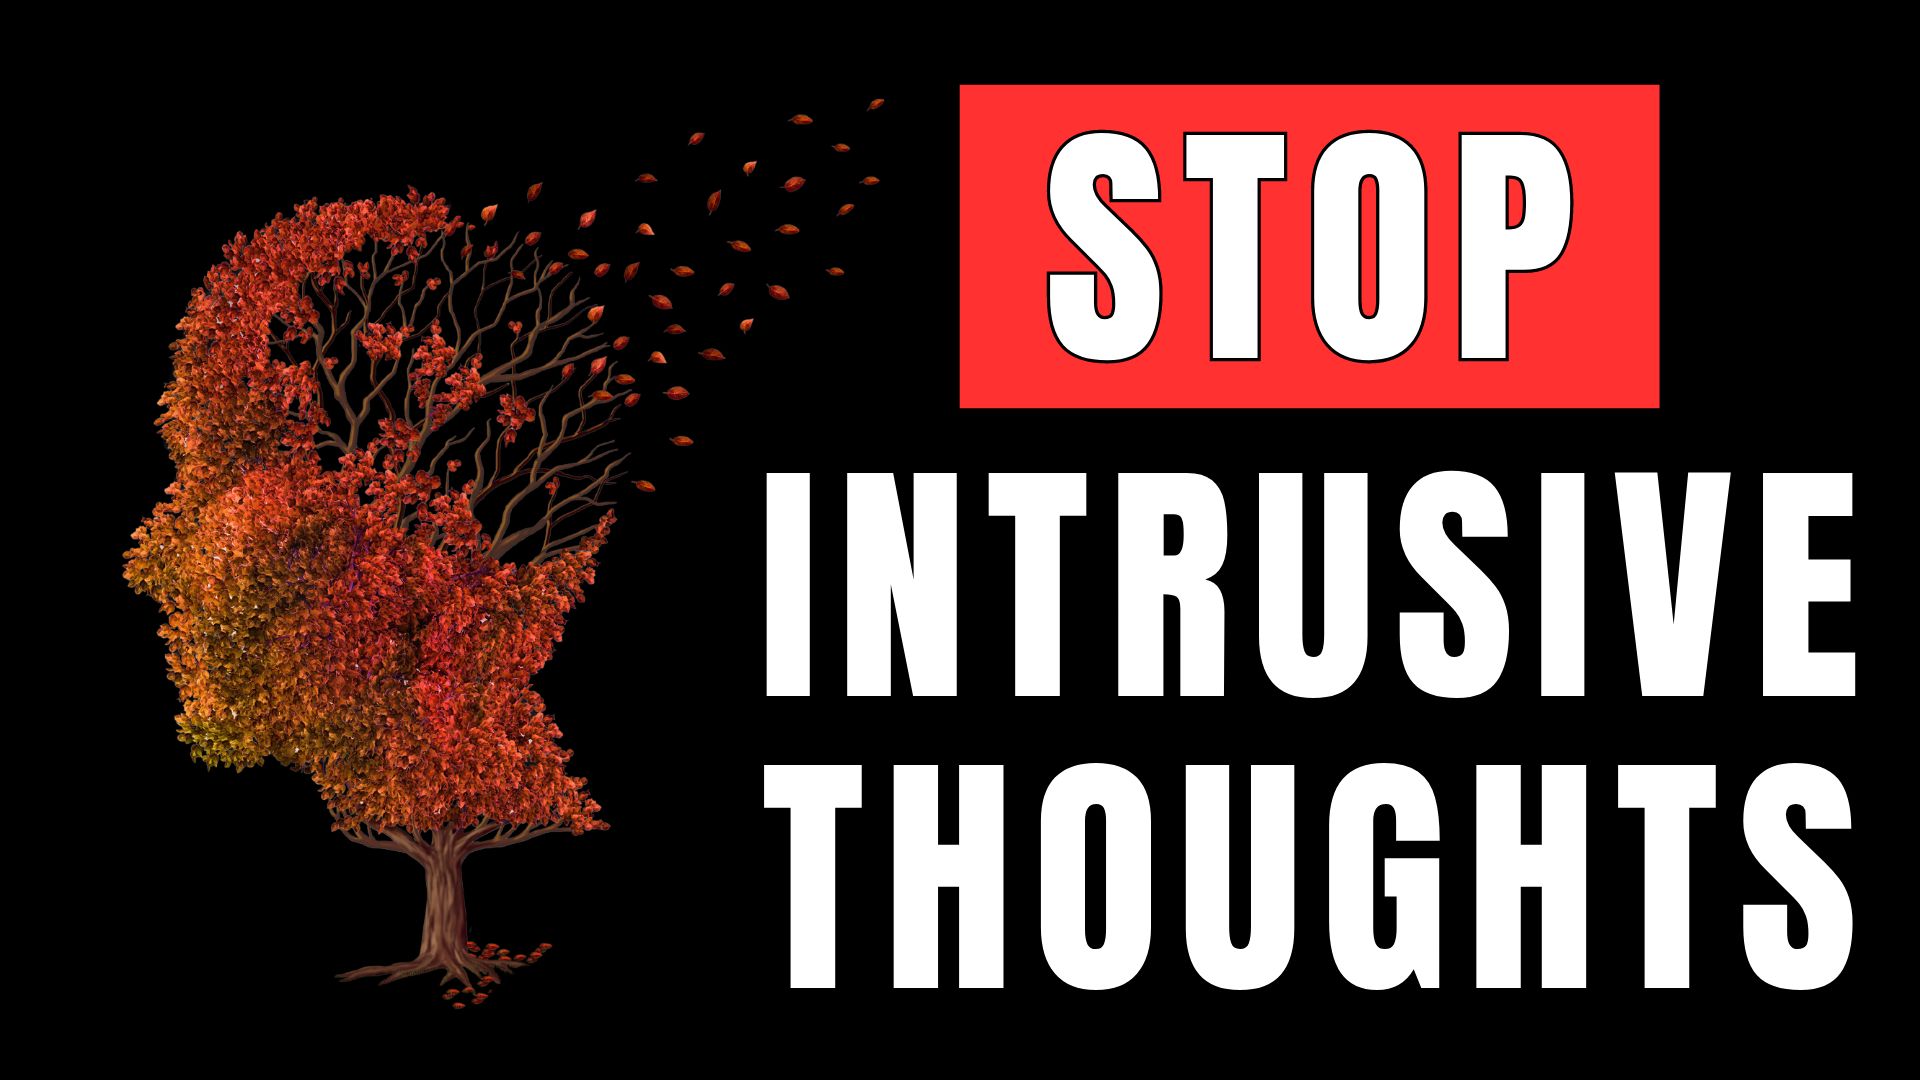 How to Stop Intrusive Thoughts